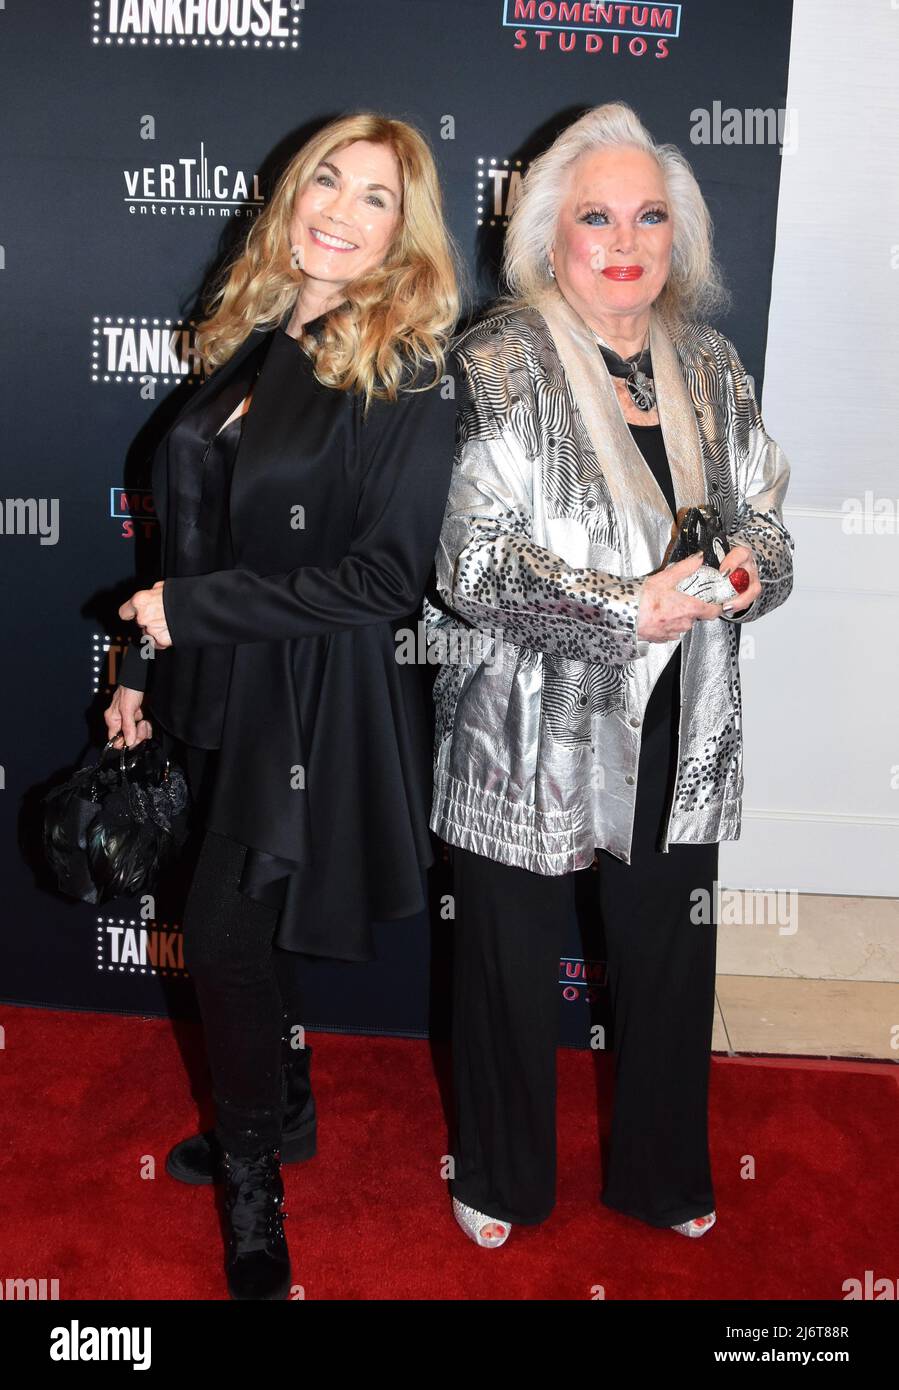 West Hollywood, California, USA 3rd May 2022 Barbi Benton and Carol Connors  attend Los Angeles Premiere of Tankhouse at The London Hotel on May 3, 2022  in West Hollywood, California, USA. Photo